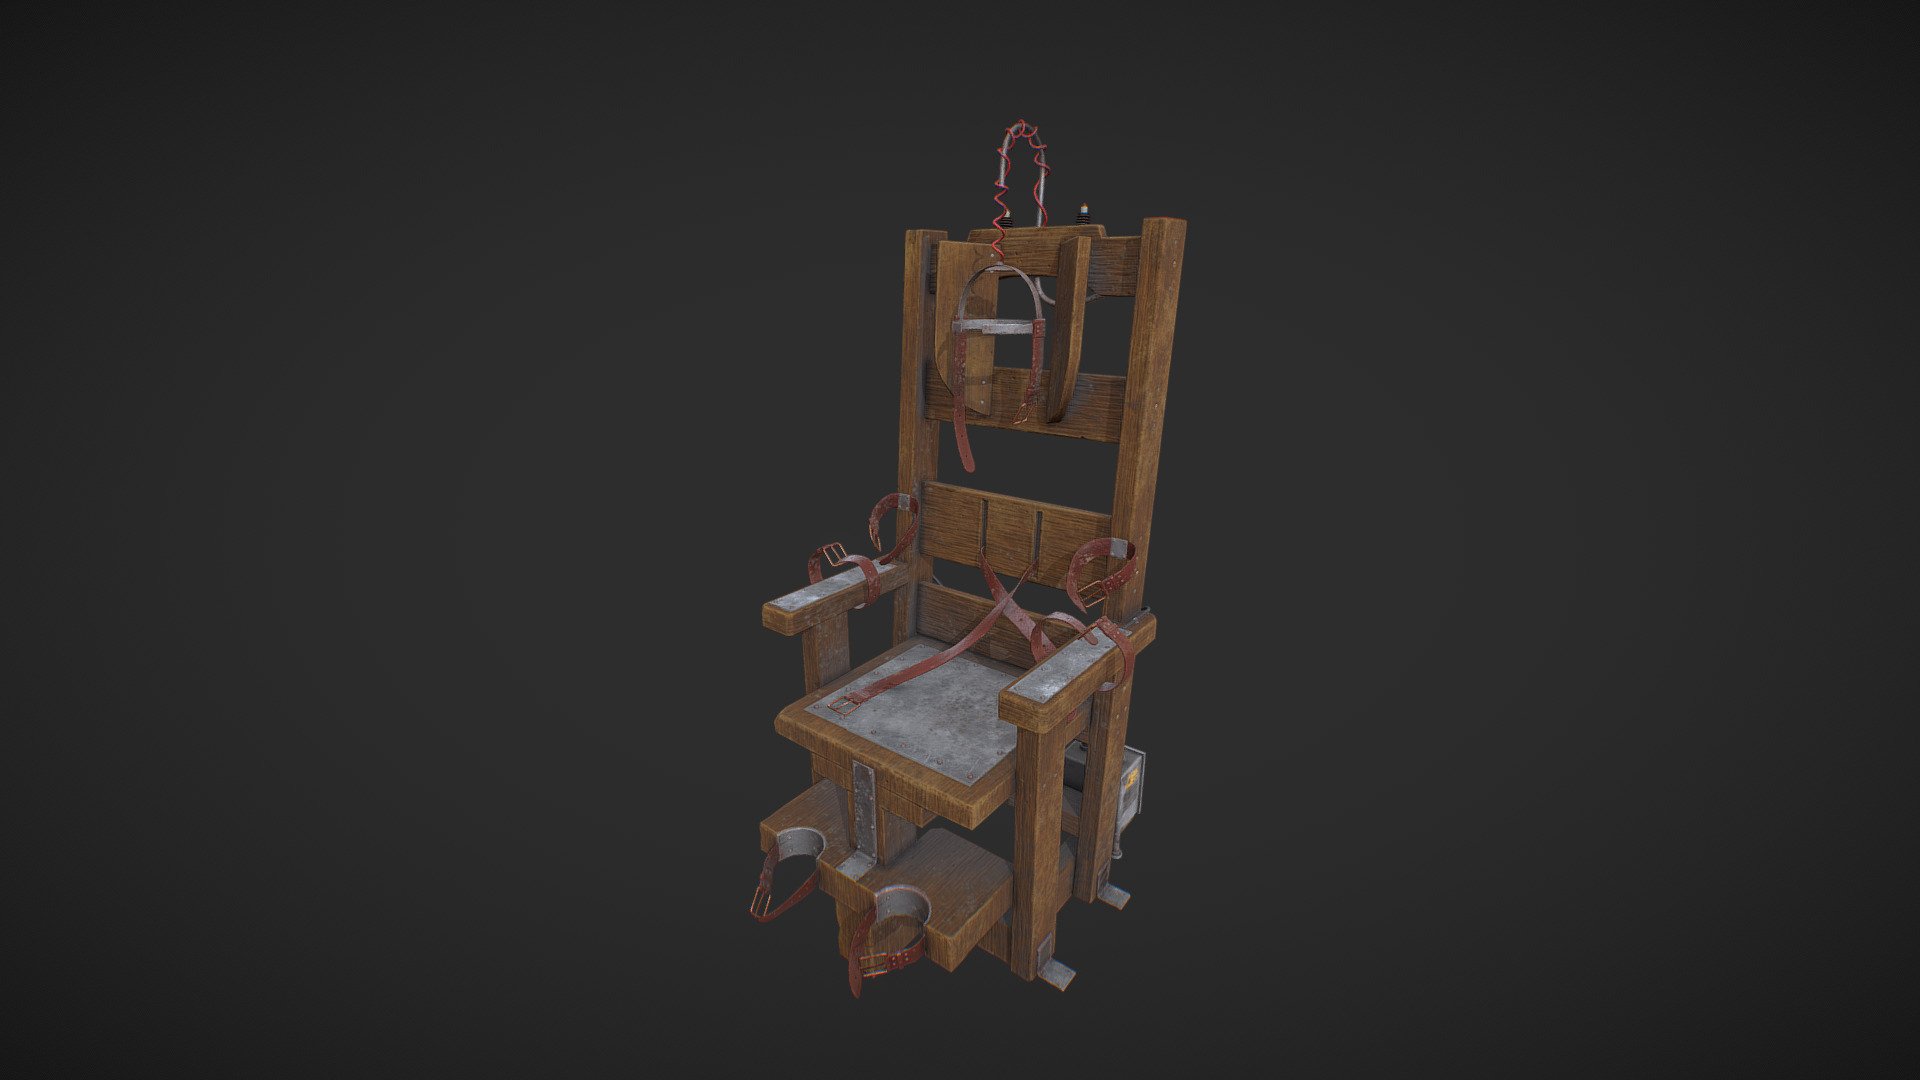 Game Ready Asset Based on an old university project this 3D Electric Chair is the first of hopefully many weekend sculpts to come, with the main focus being on translating my old personal projects and designs into 3D.

Check my Portfolio - Electric Chair - 3D model by Jairo Alzate (@jairoalzate) 3d model